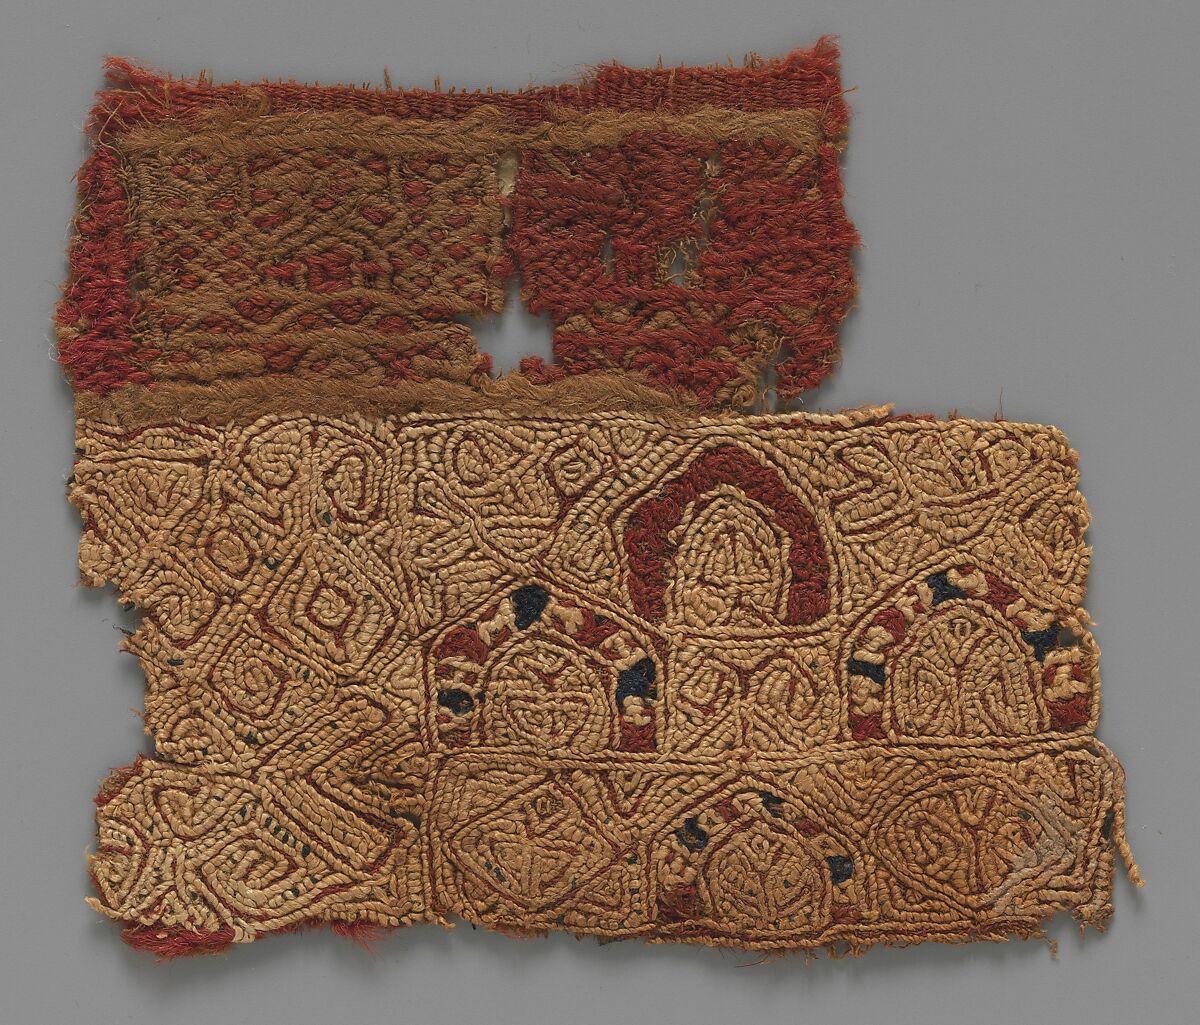 Textile fragment with Architectural Motif, Linen, wool; tapestry weave, embroidered 